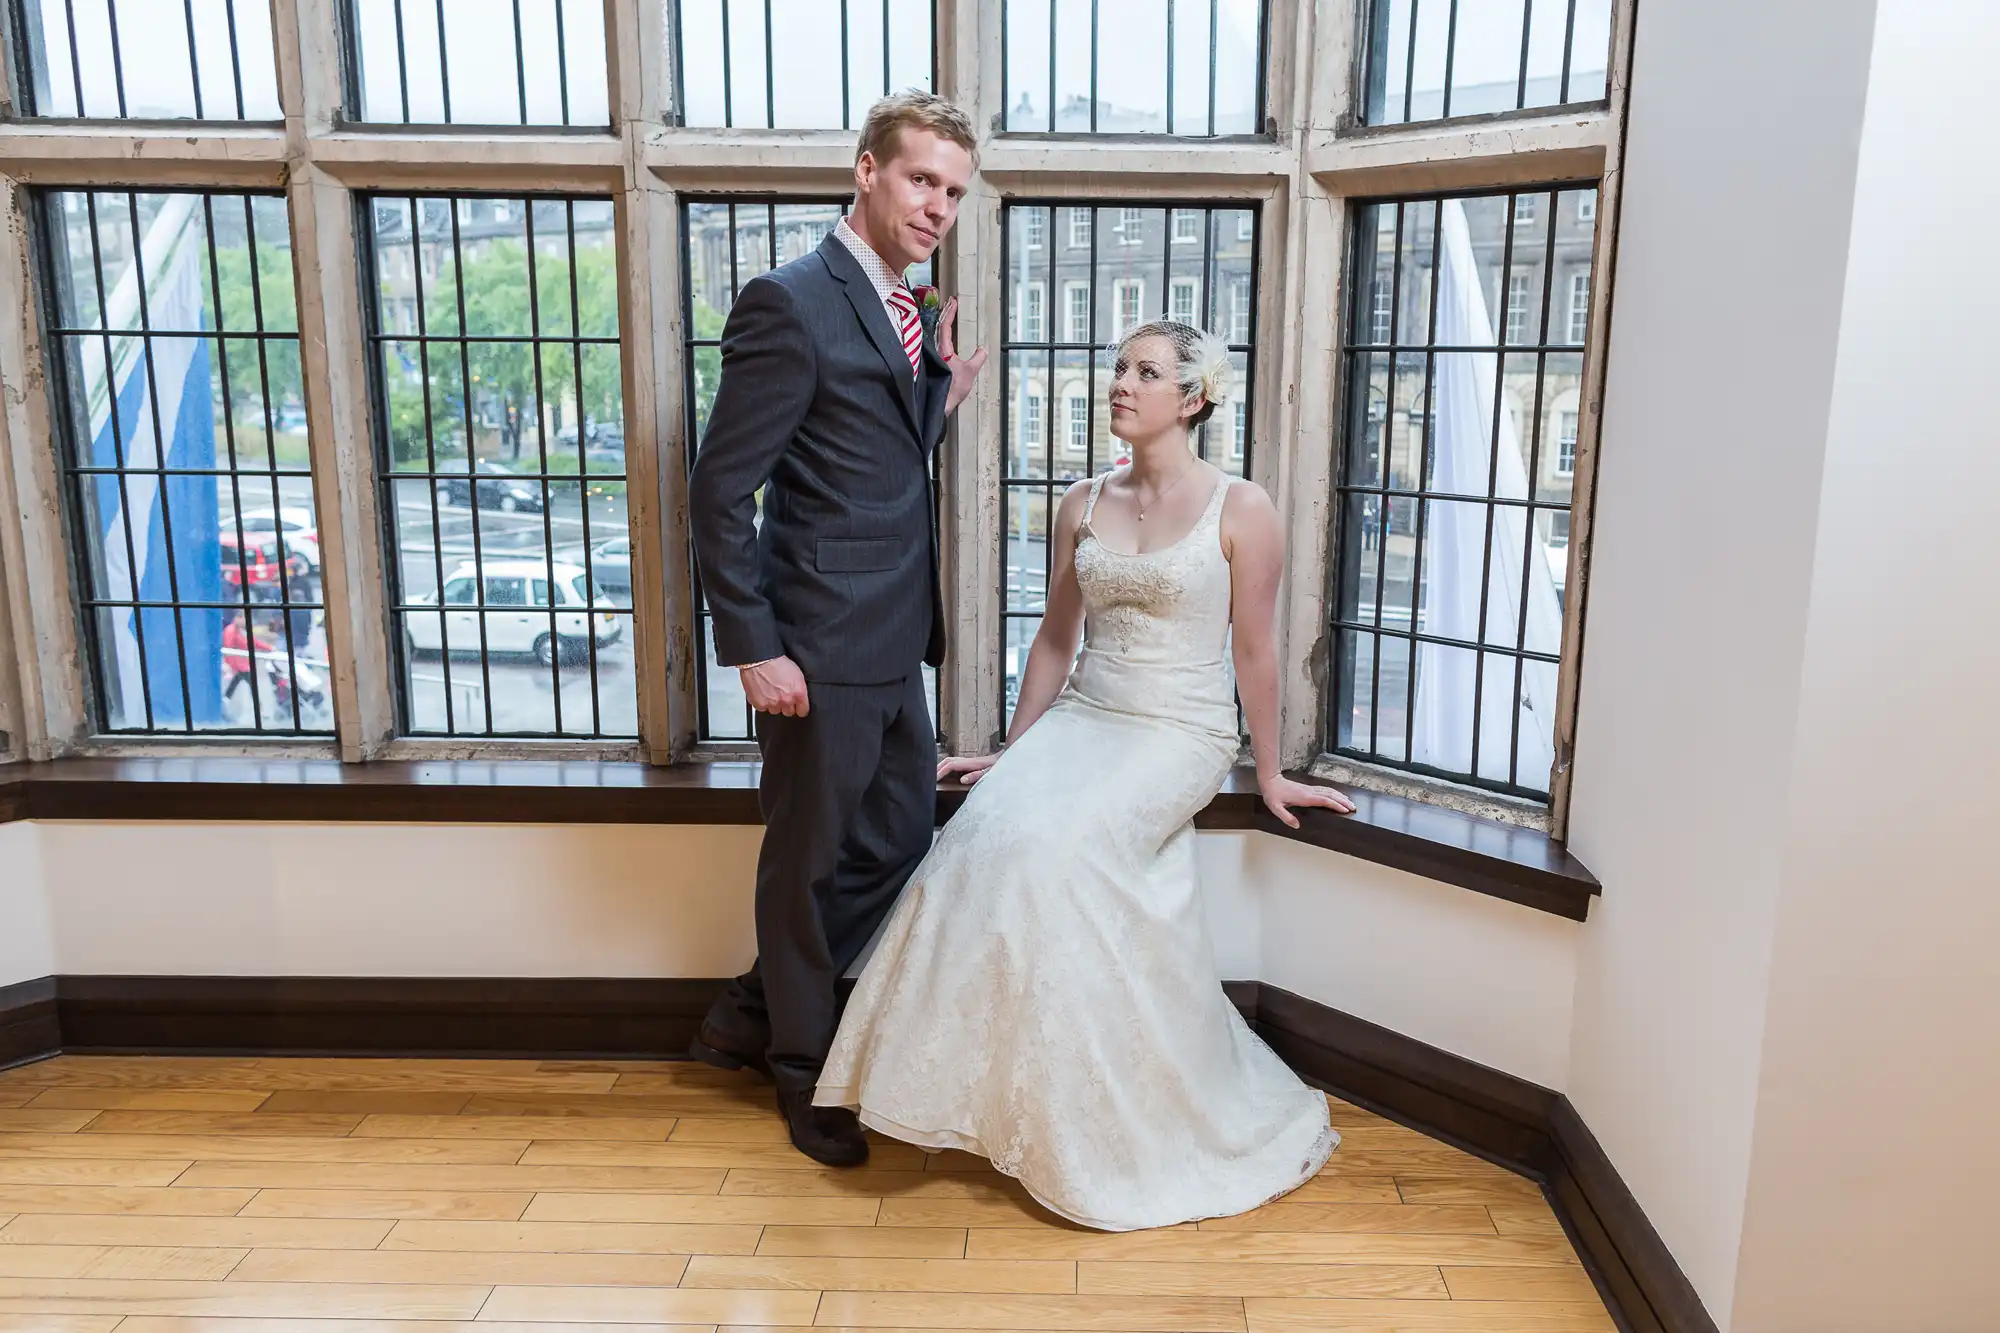 A bride in a white gown and a groom in a suit pose by large windows in a room with wooden floors.